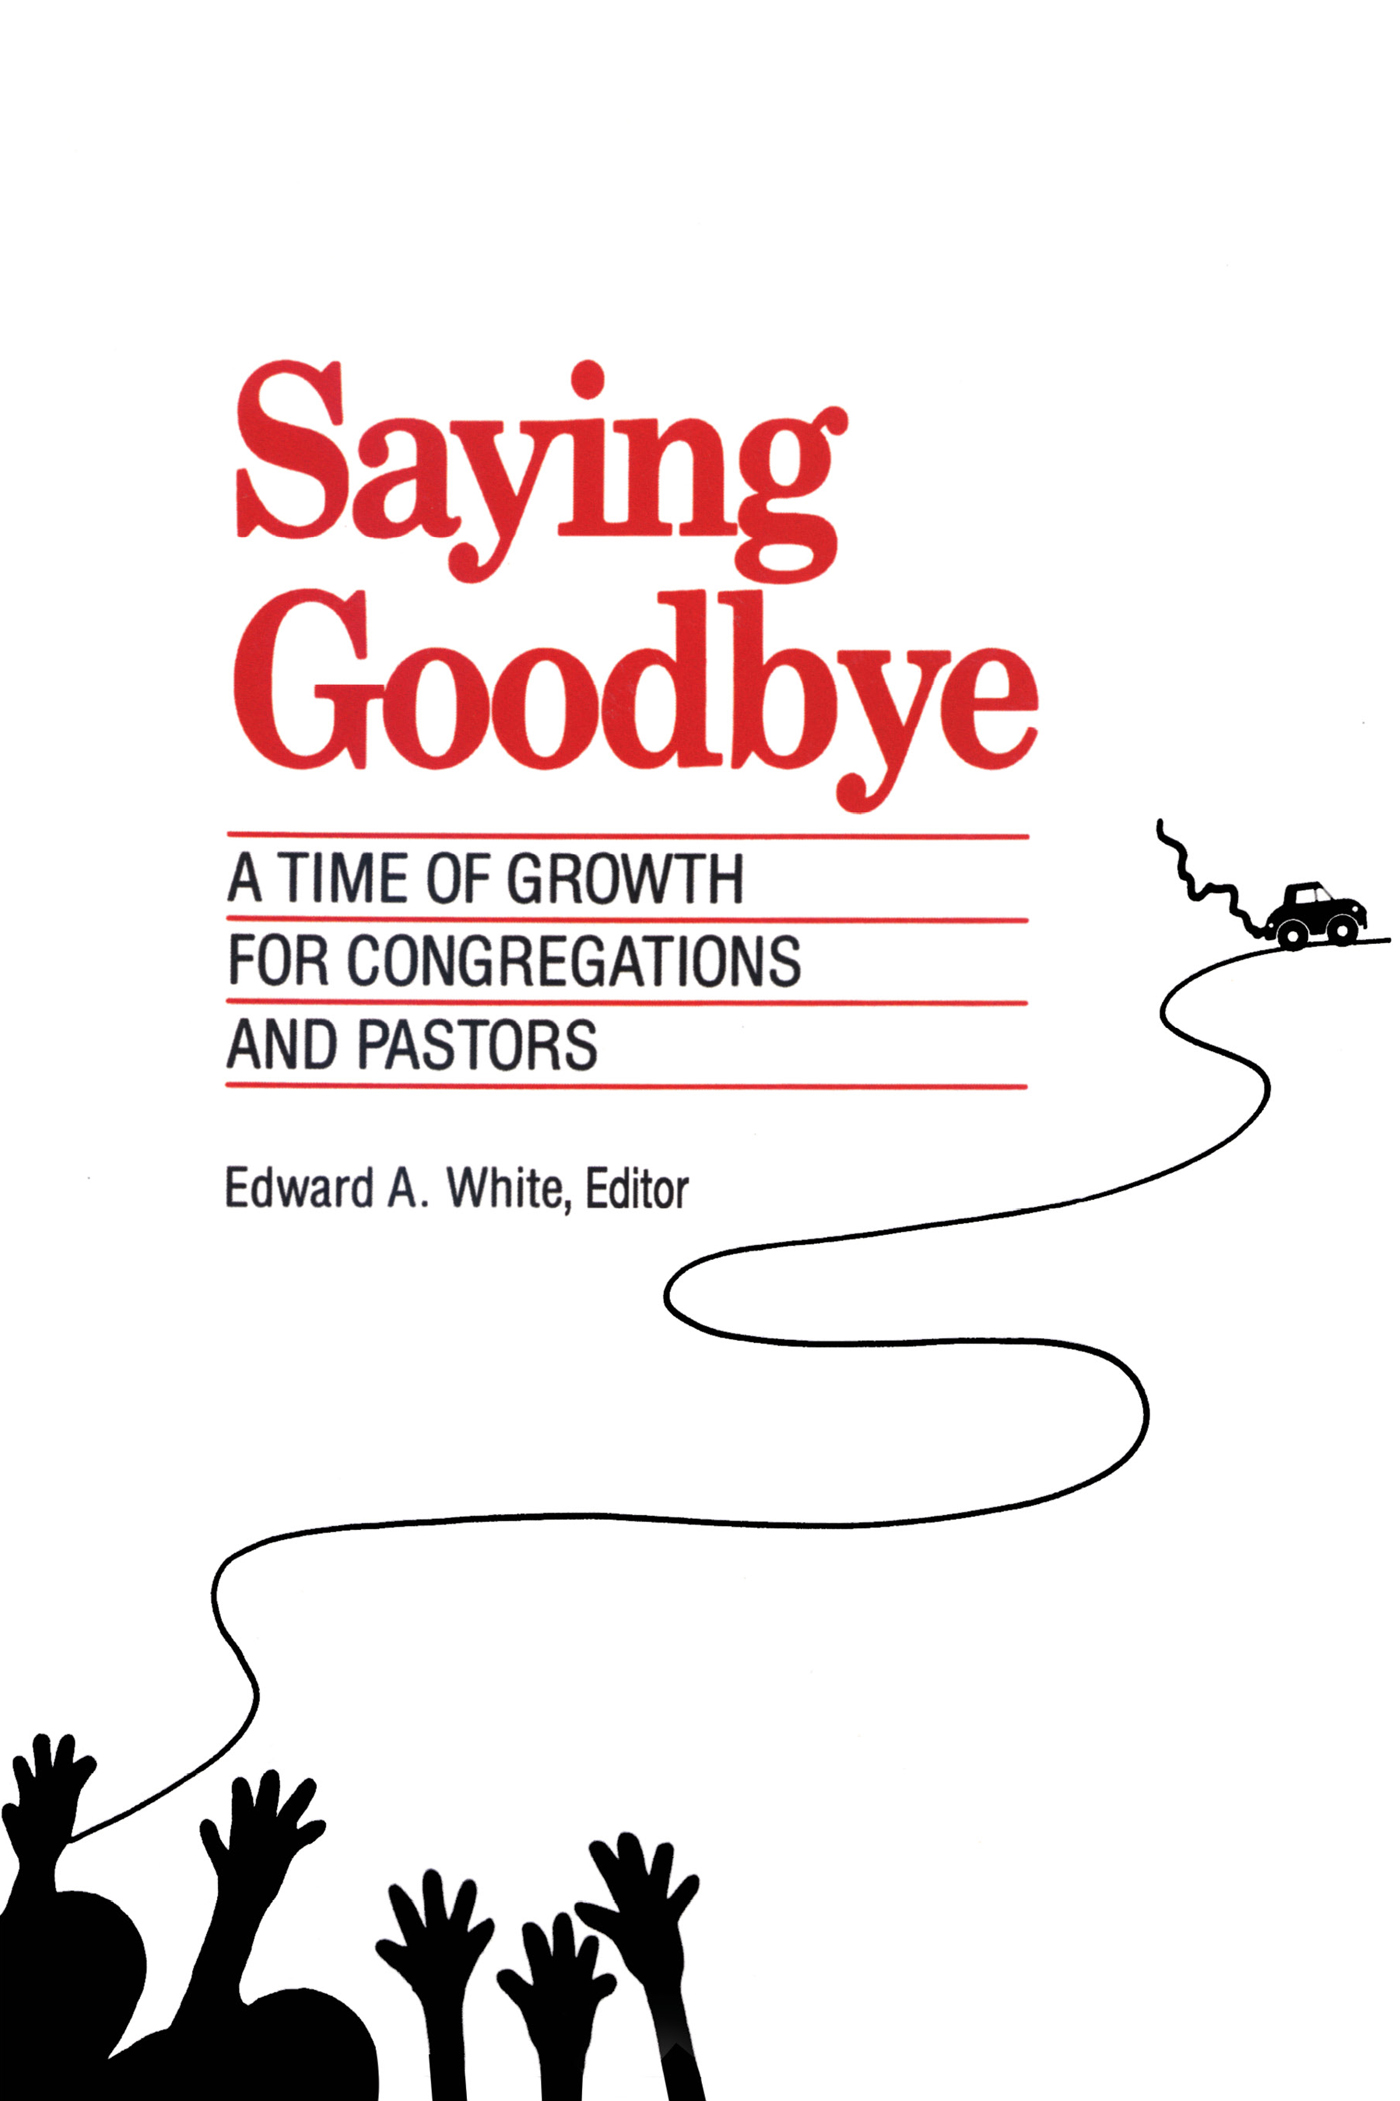 Saying Goodbye: A Time of Growth for Congregations and Pastors